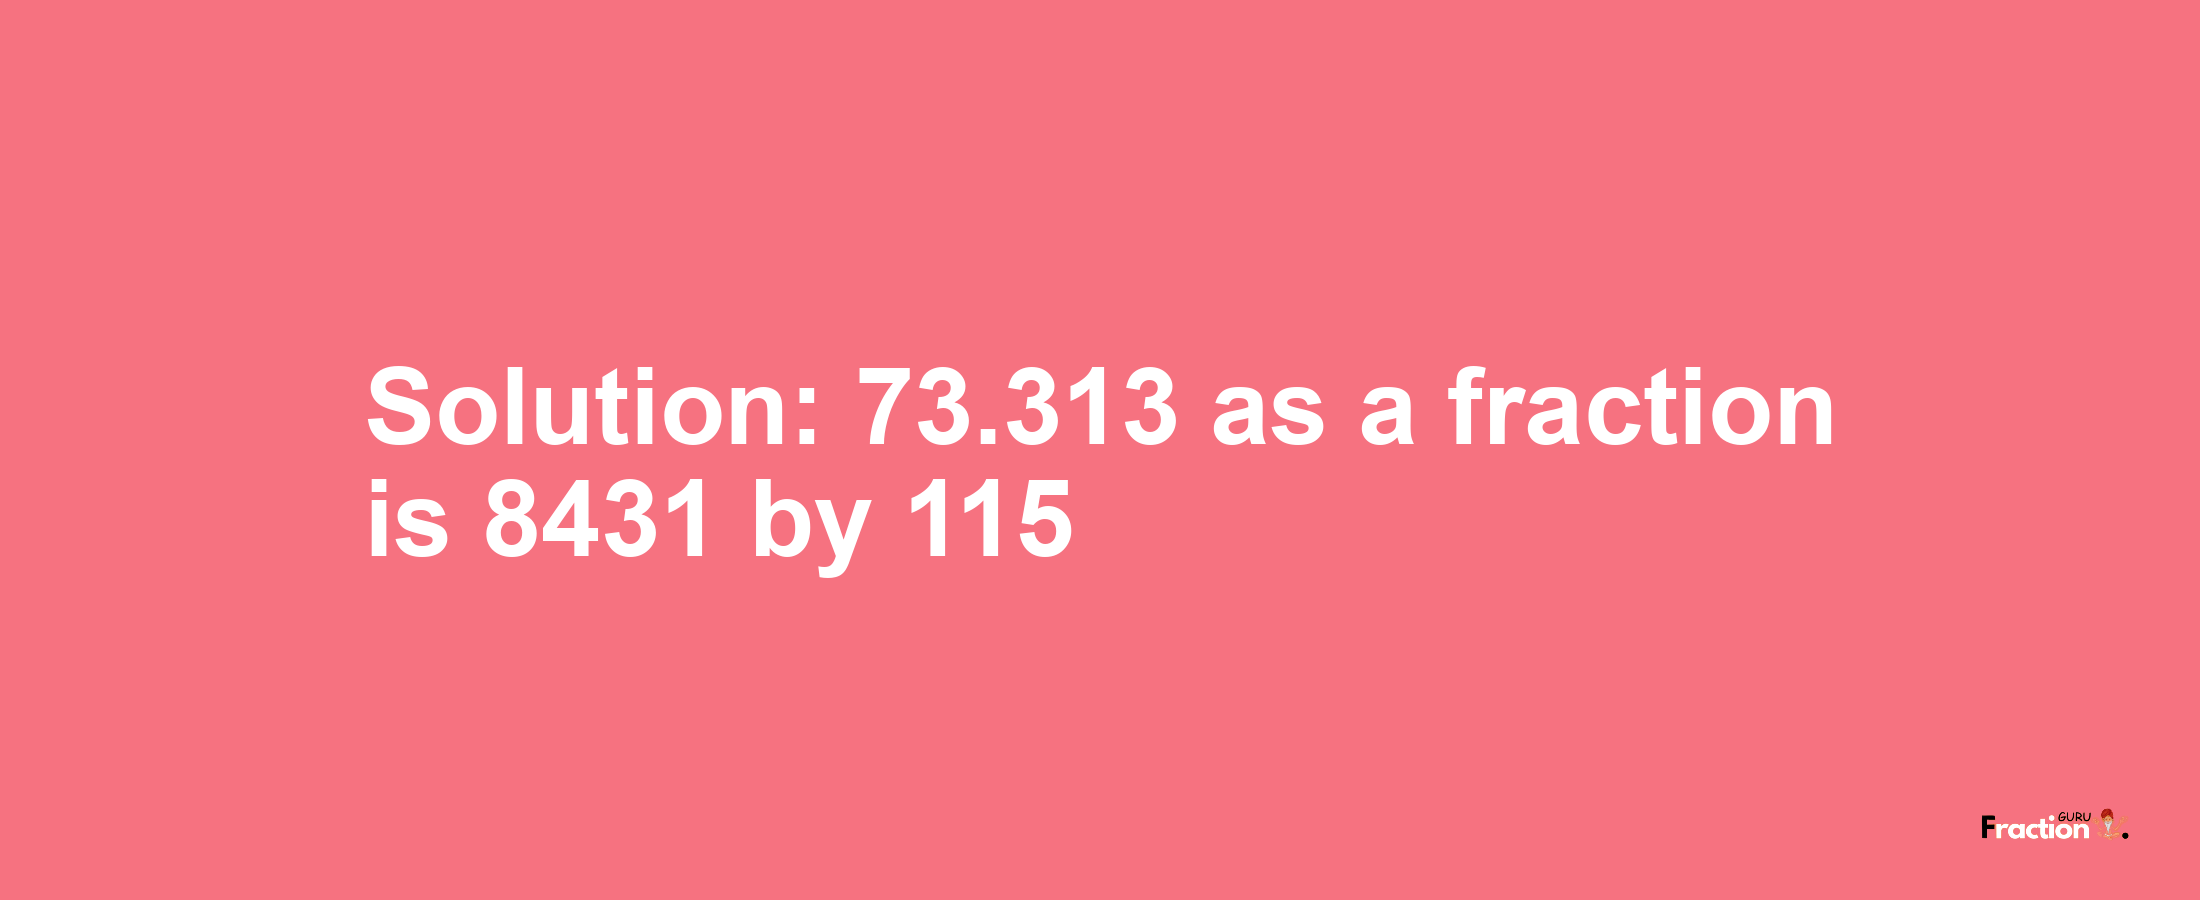 Solution:73.313 as a fraction is 8431/115